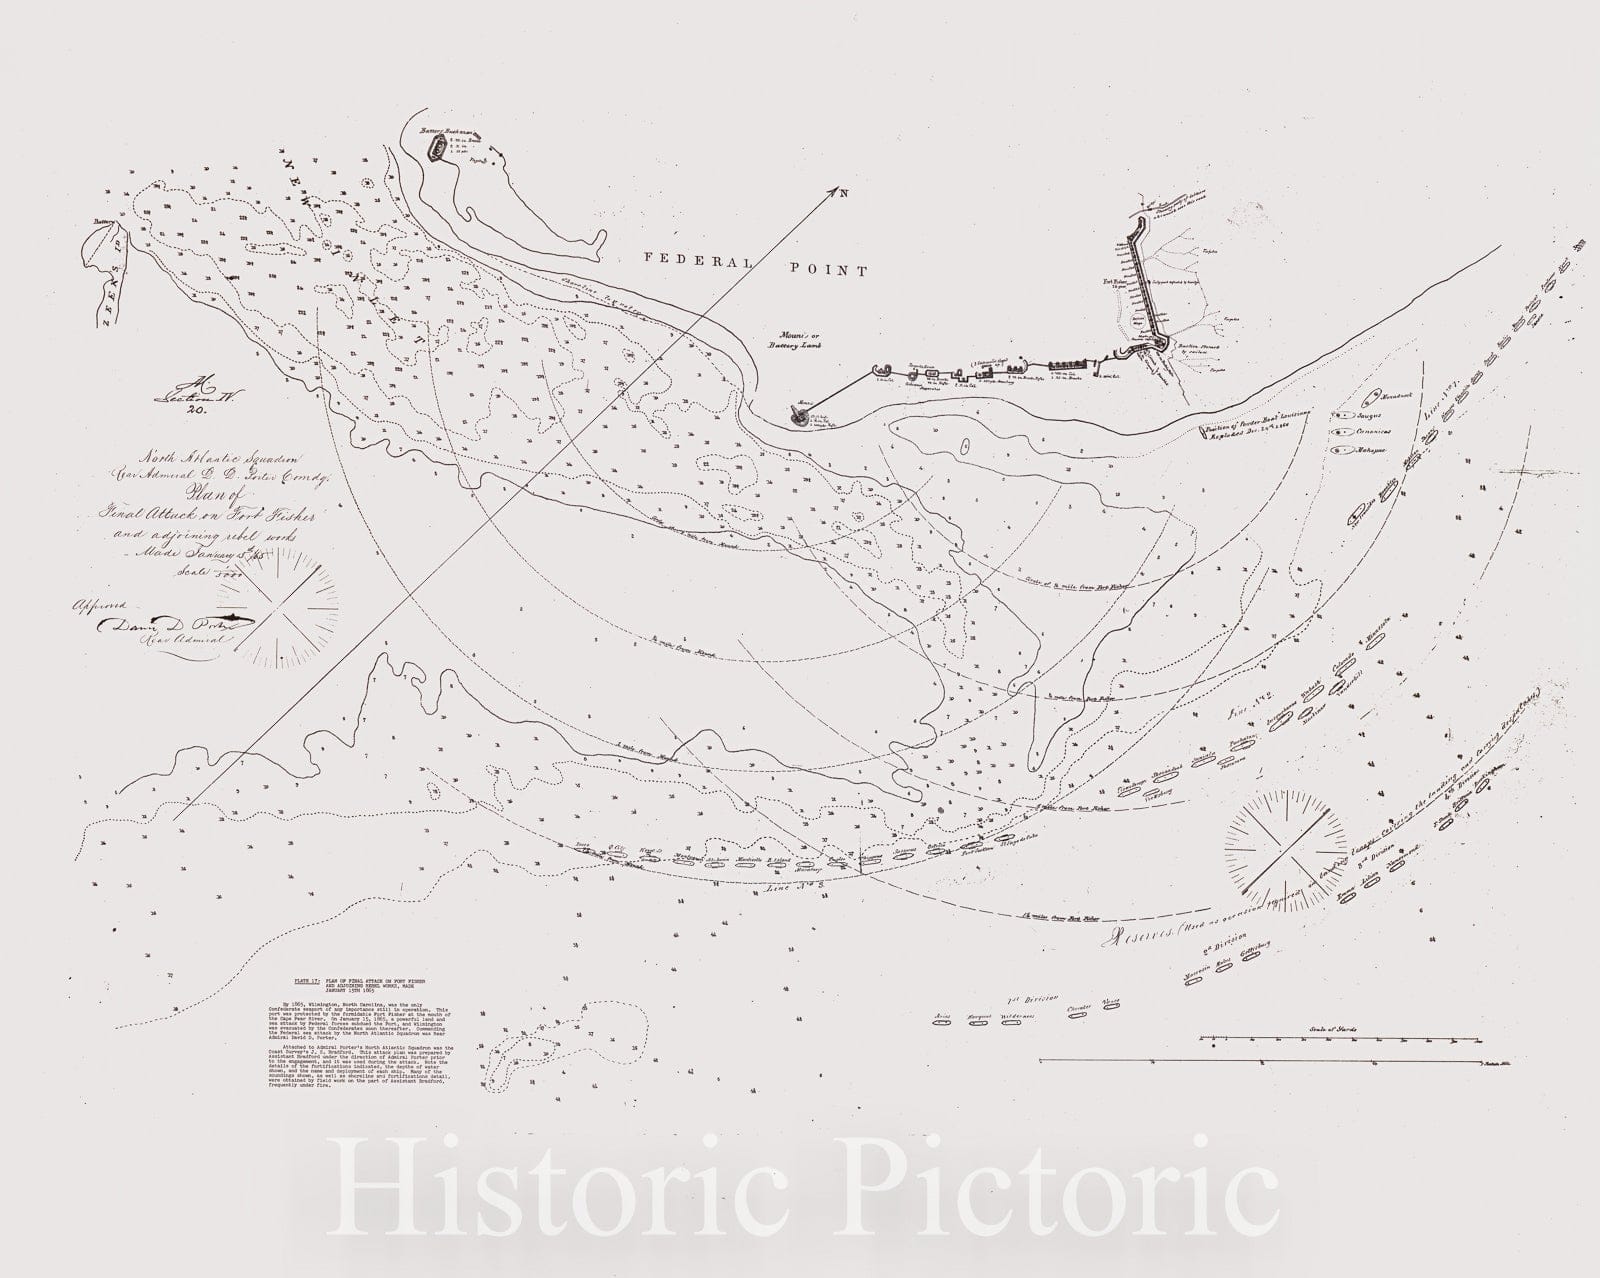 Historic 1961 Map - Selected Civil War maps - Plan of Attack on Fort Fisher and adjoining Rebel Work, Jan. 15, 1865 - Civil War maps